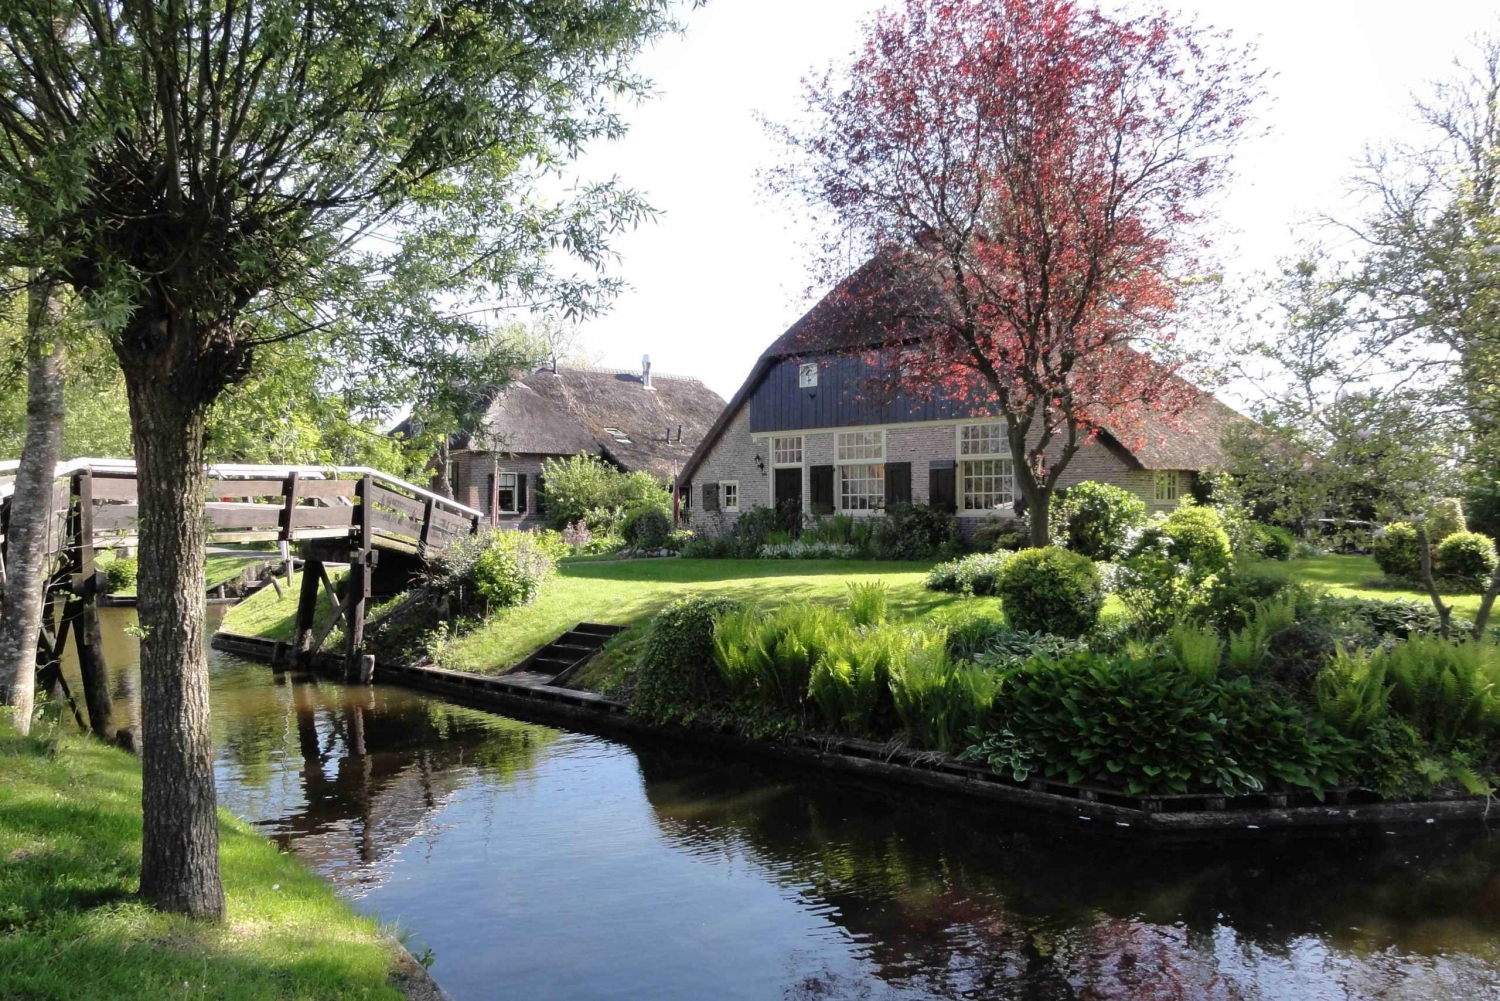 Tulips & Canals: Private Day Trip to Keukenhof and Giethoorn